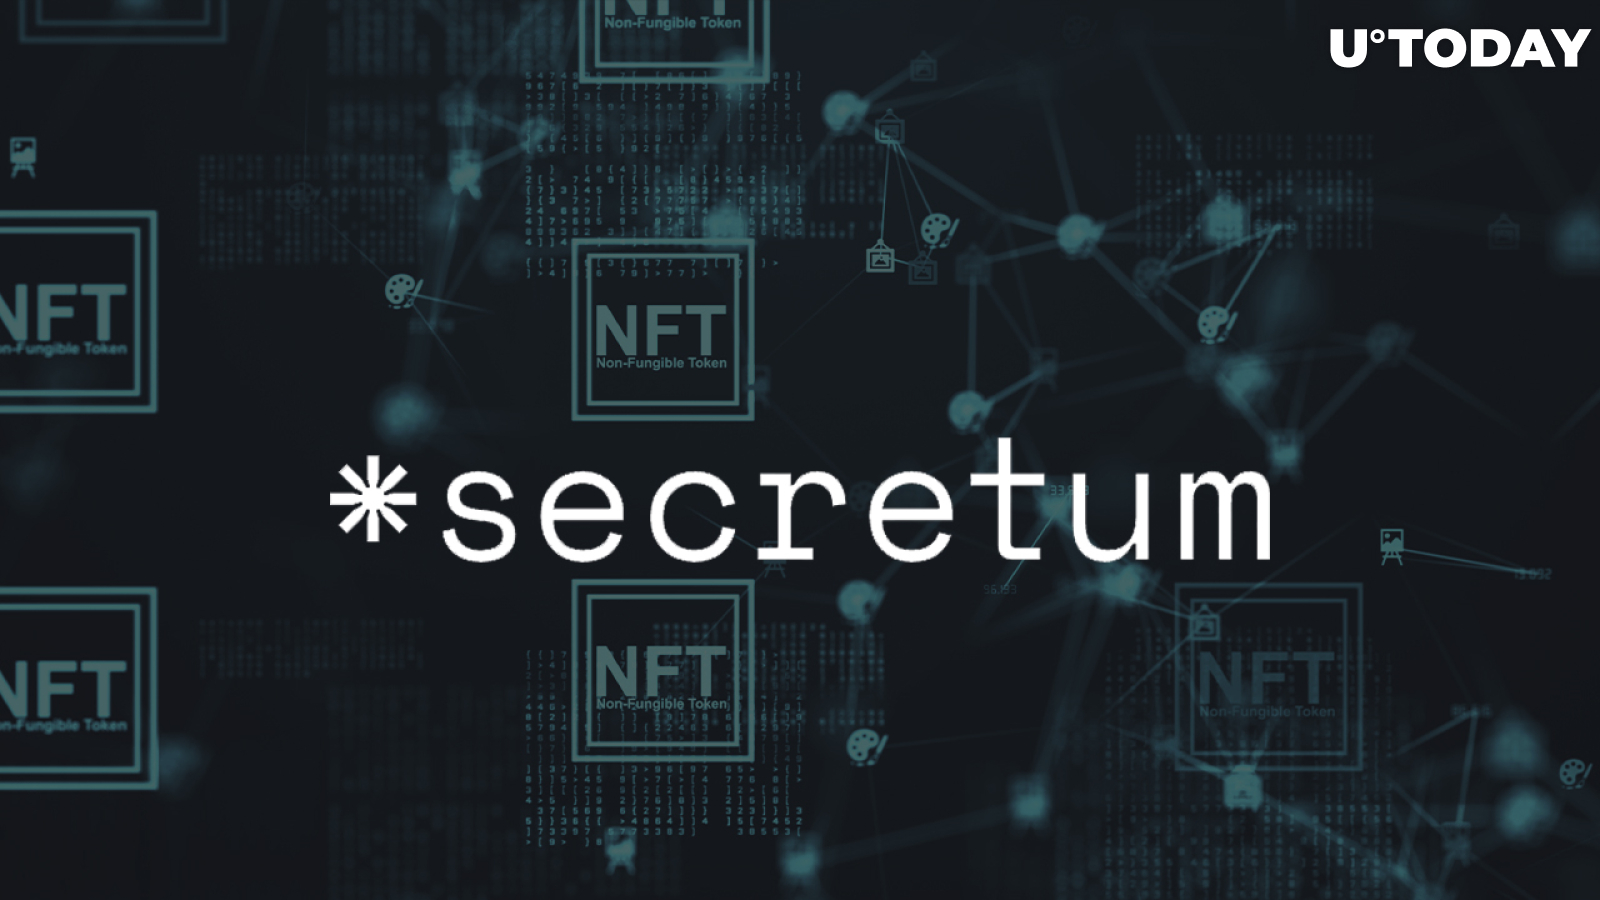 Solana-Based Secretum App Releases Strategy to Become NFT Headliner